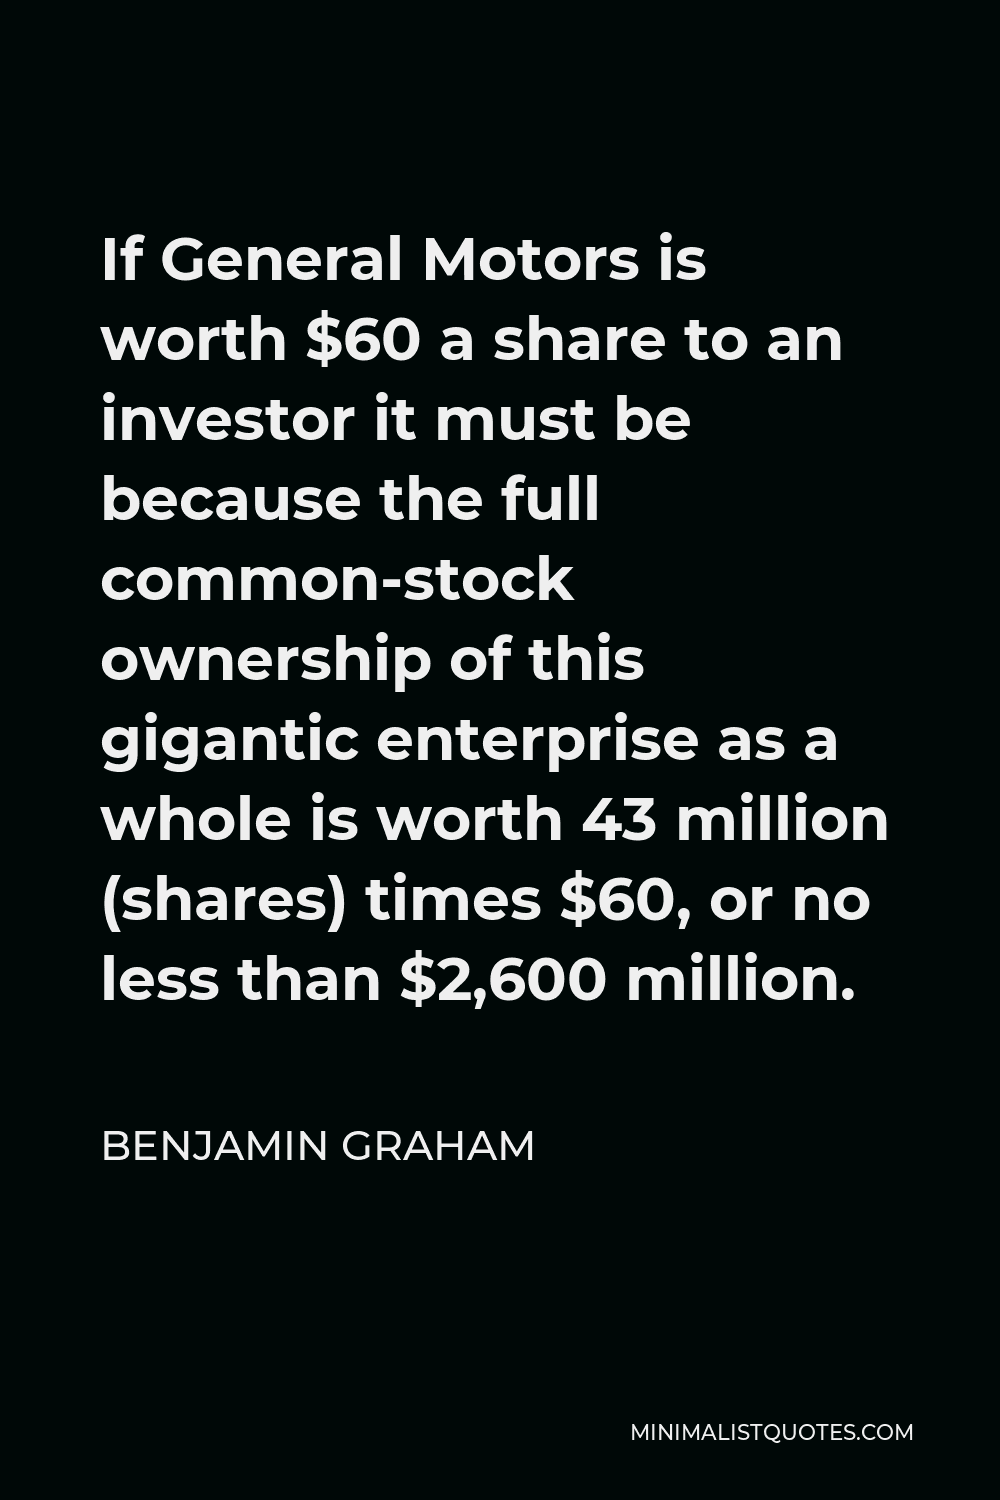 Benjamin Graham Quote - If General Motors is worth $60 a share to an investor it must be because the full common-stock ownership of this gigantic enterprise as a whole is worth 43 million (shares) times $60, or no less than $2,600 million.